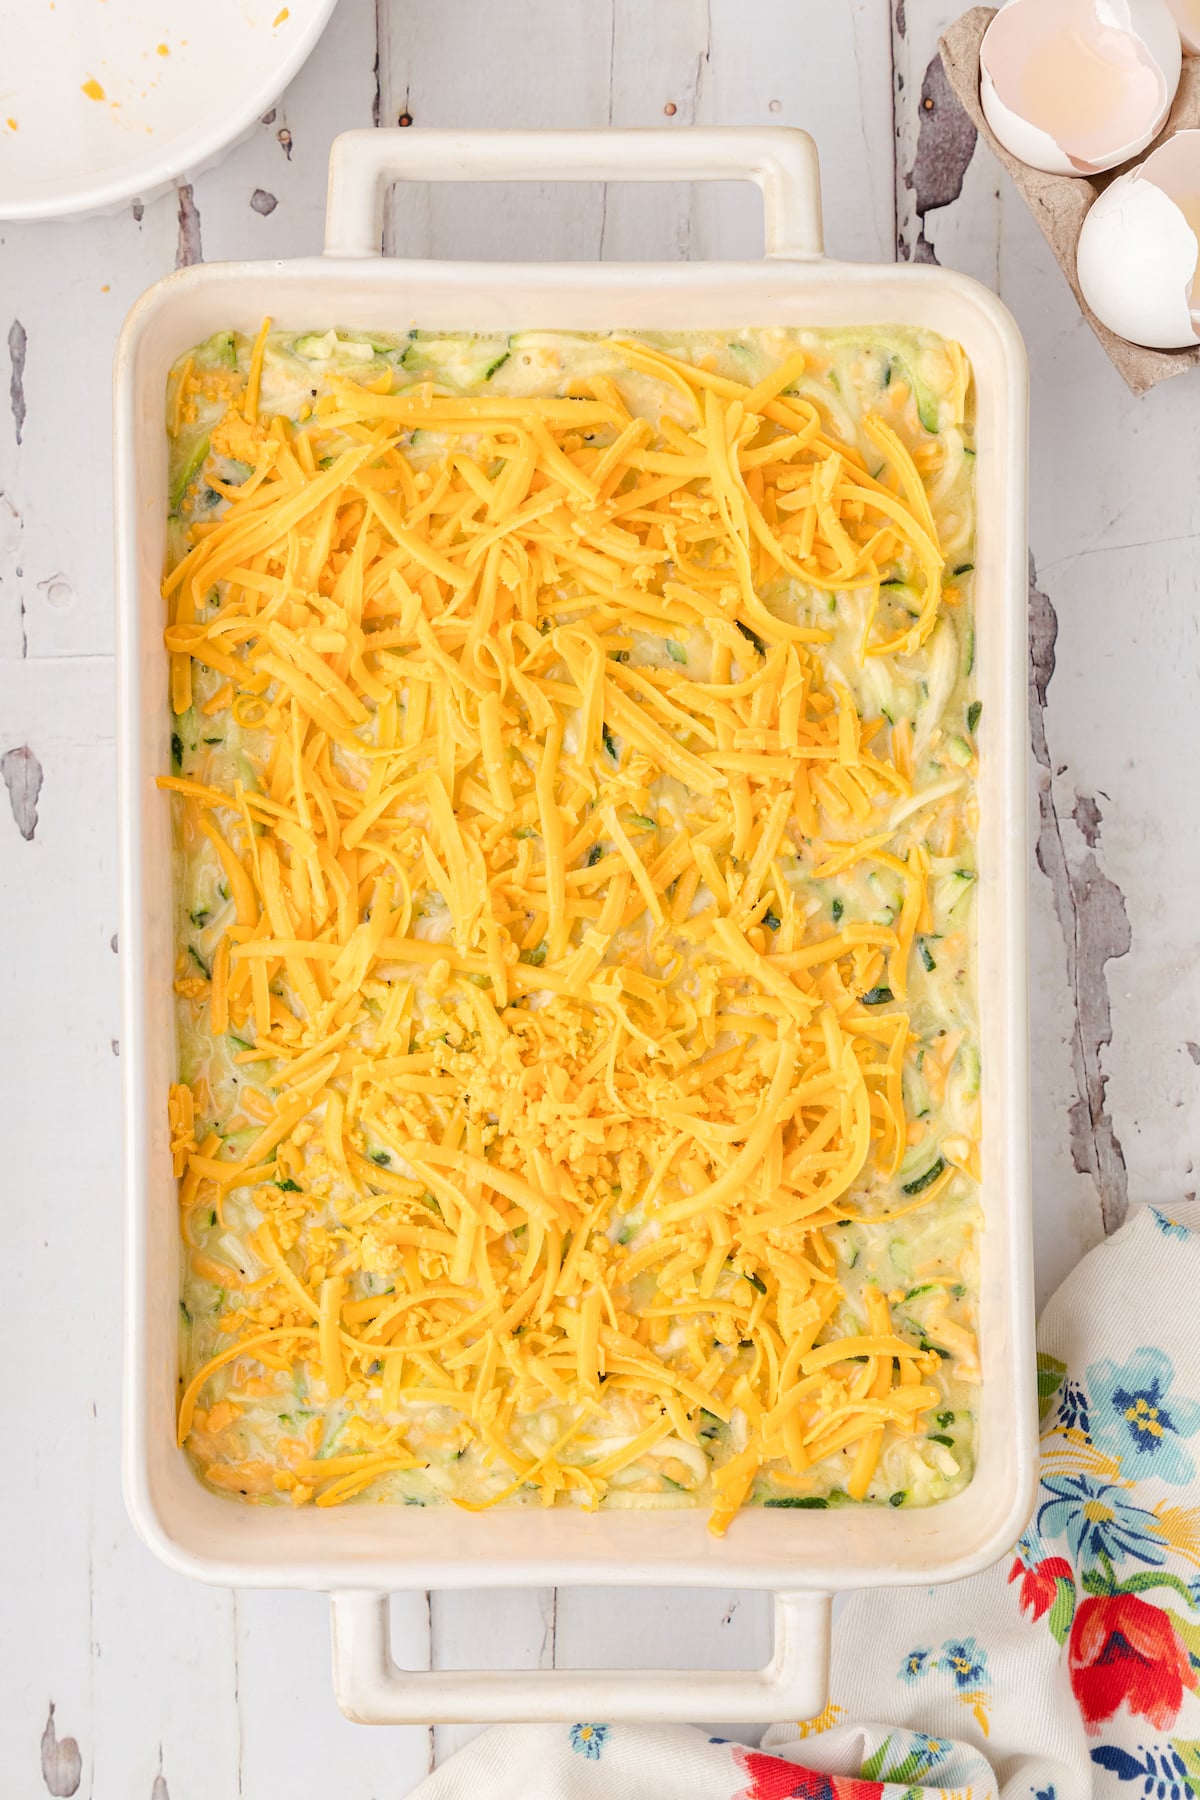 top zucchini batter with shredded cheddar cheese